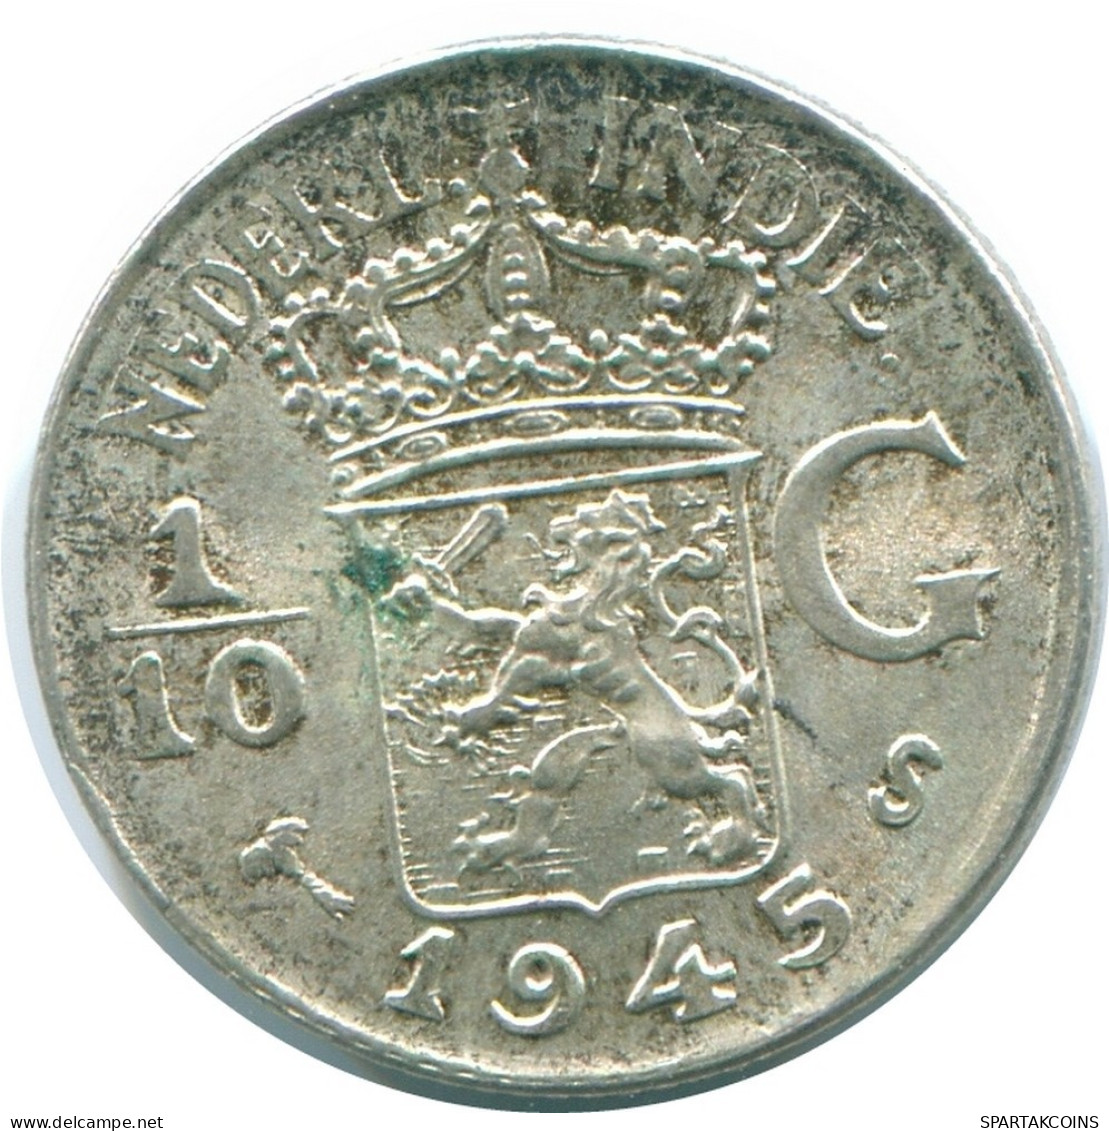 1/10 GULDEN 1945 S NETHERLANDS EAST INDIES SILVER Colonial Coin #NL14100.3.U.A - Dutch East Indies